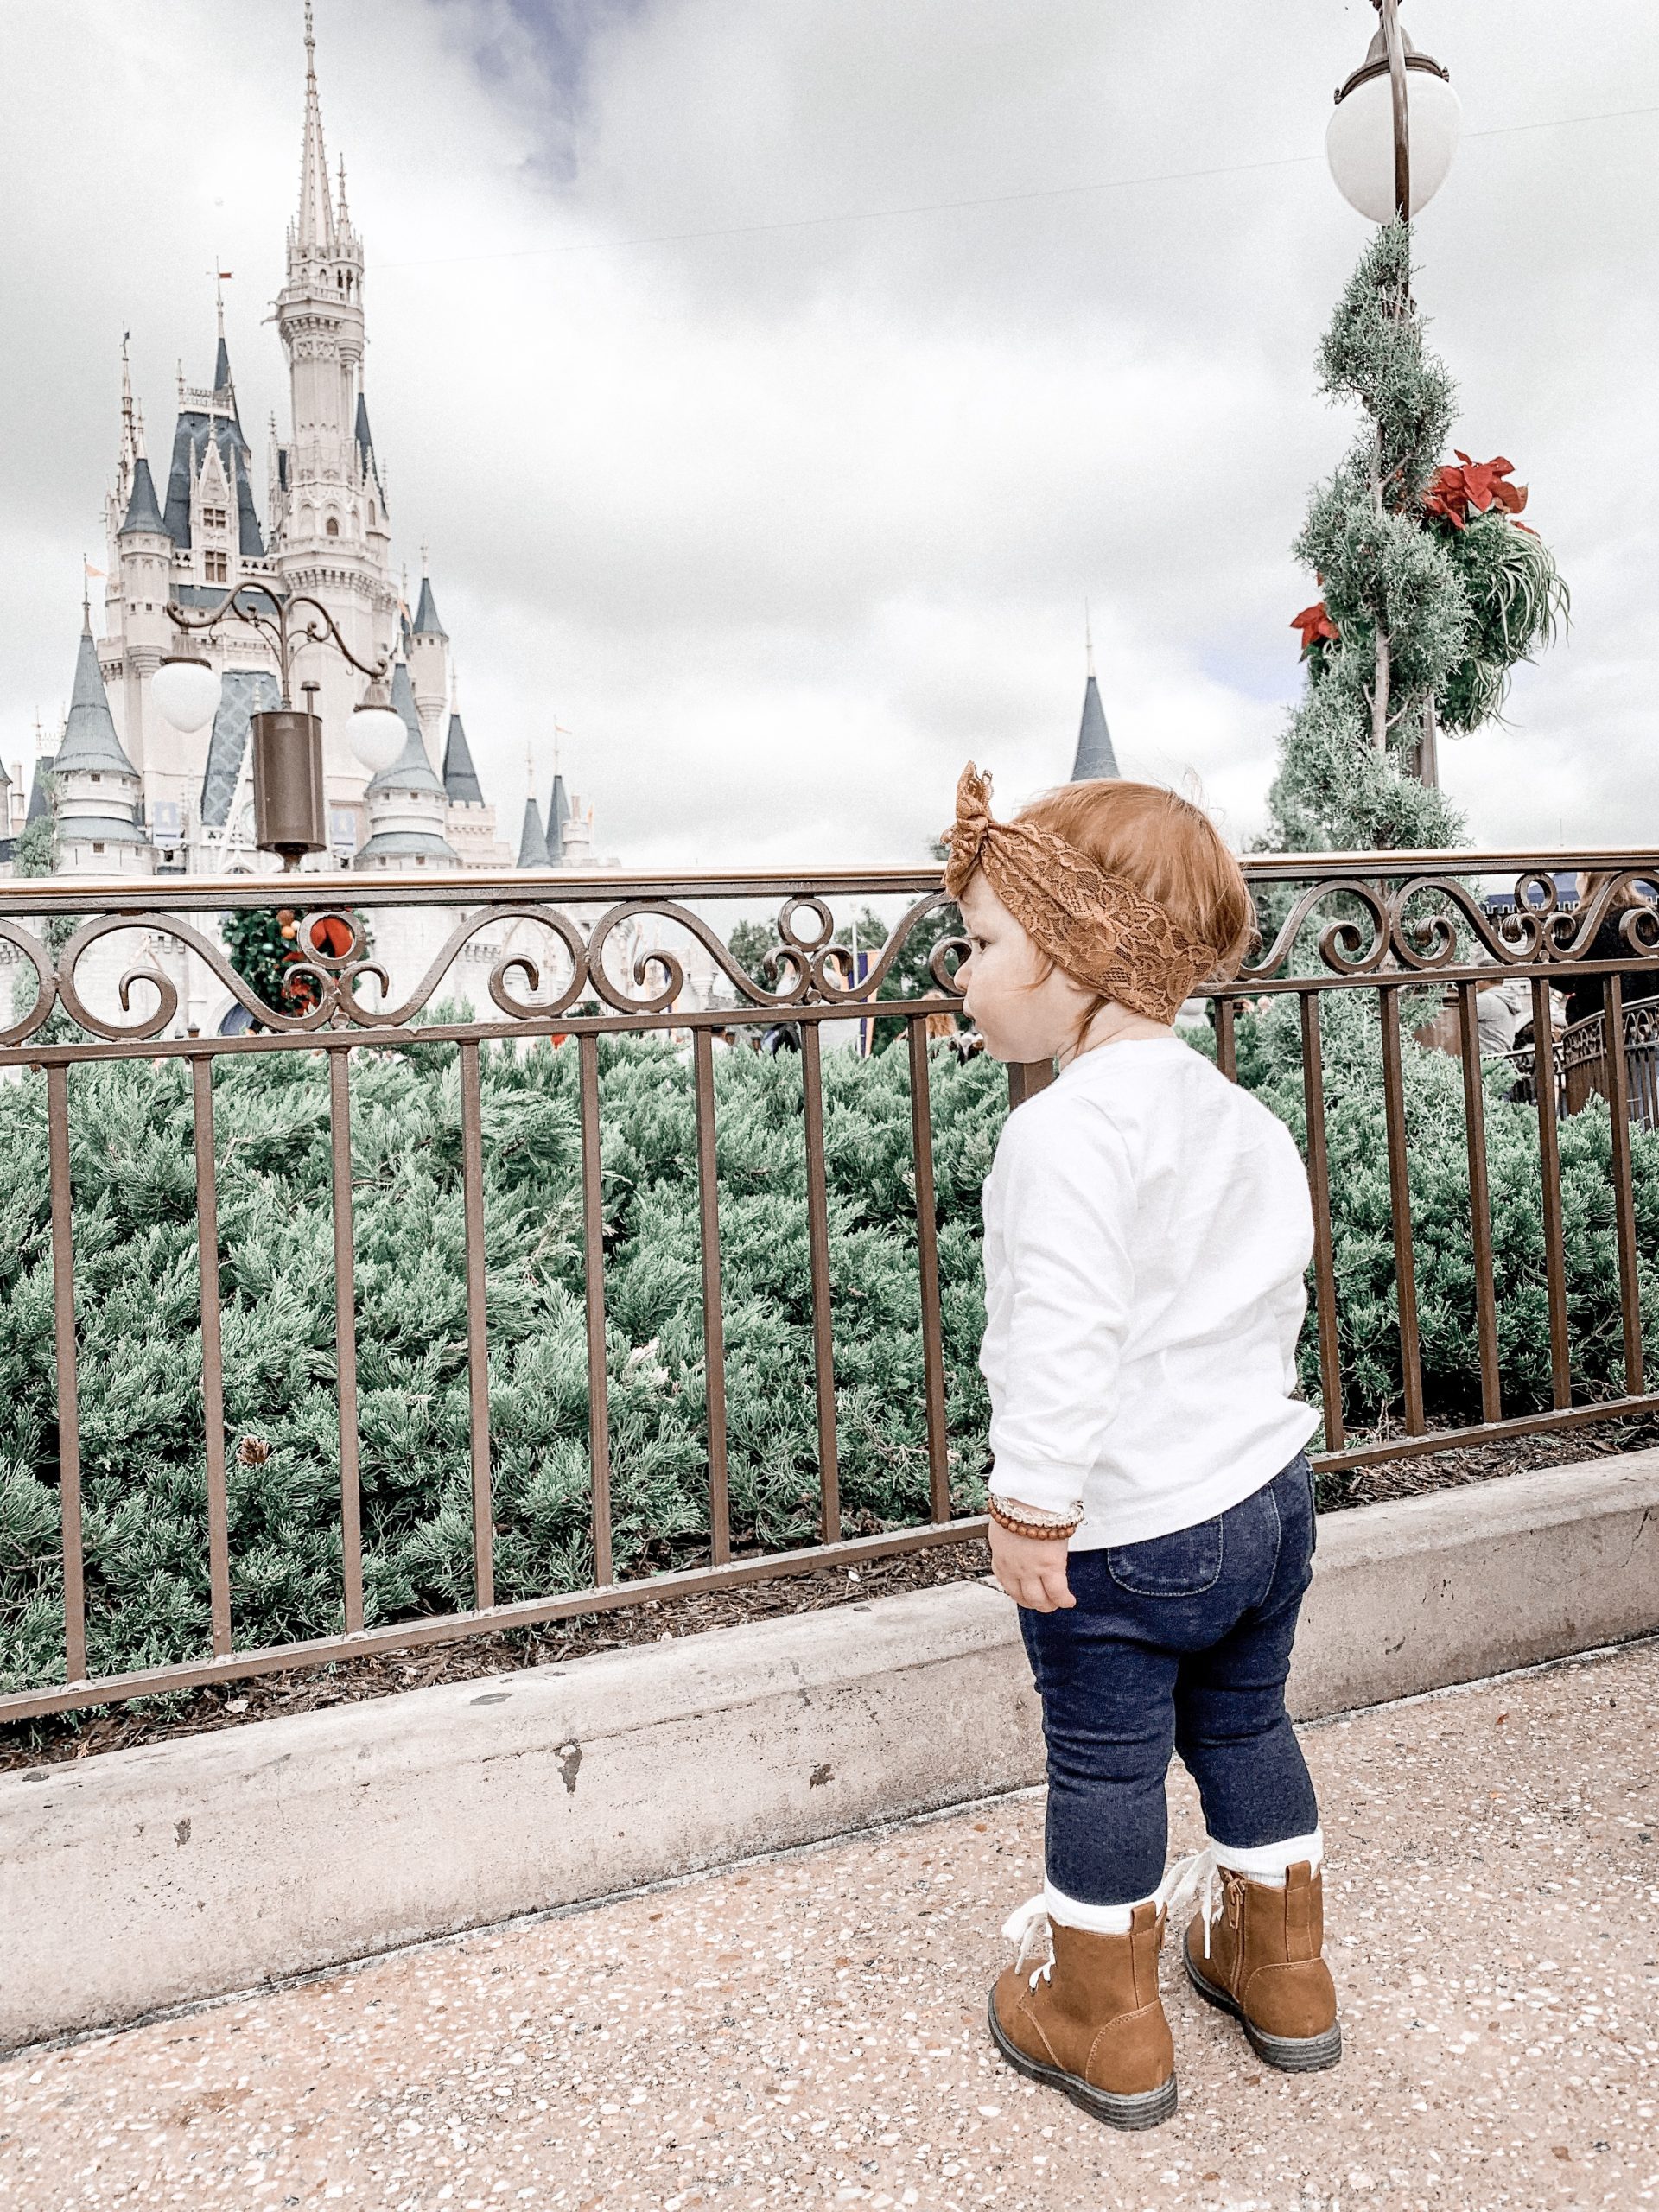 little girl in front of cinderella castle and fence